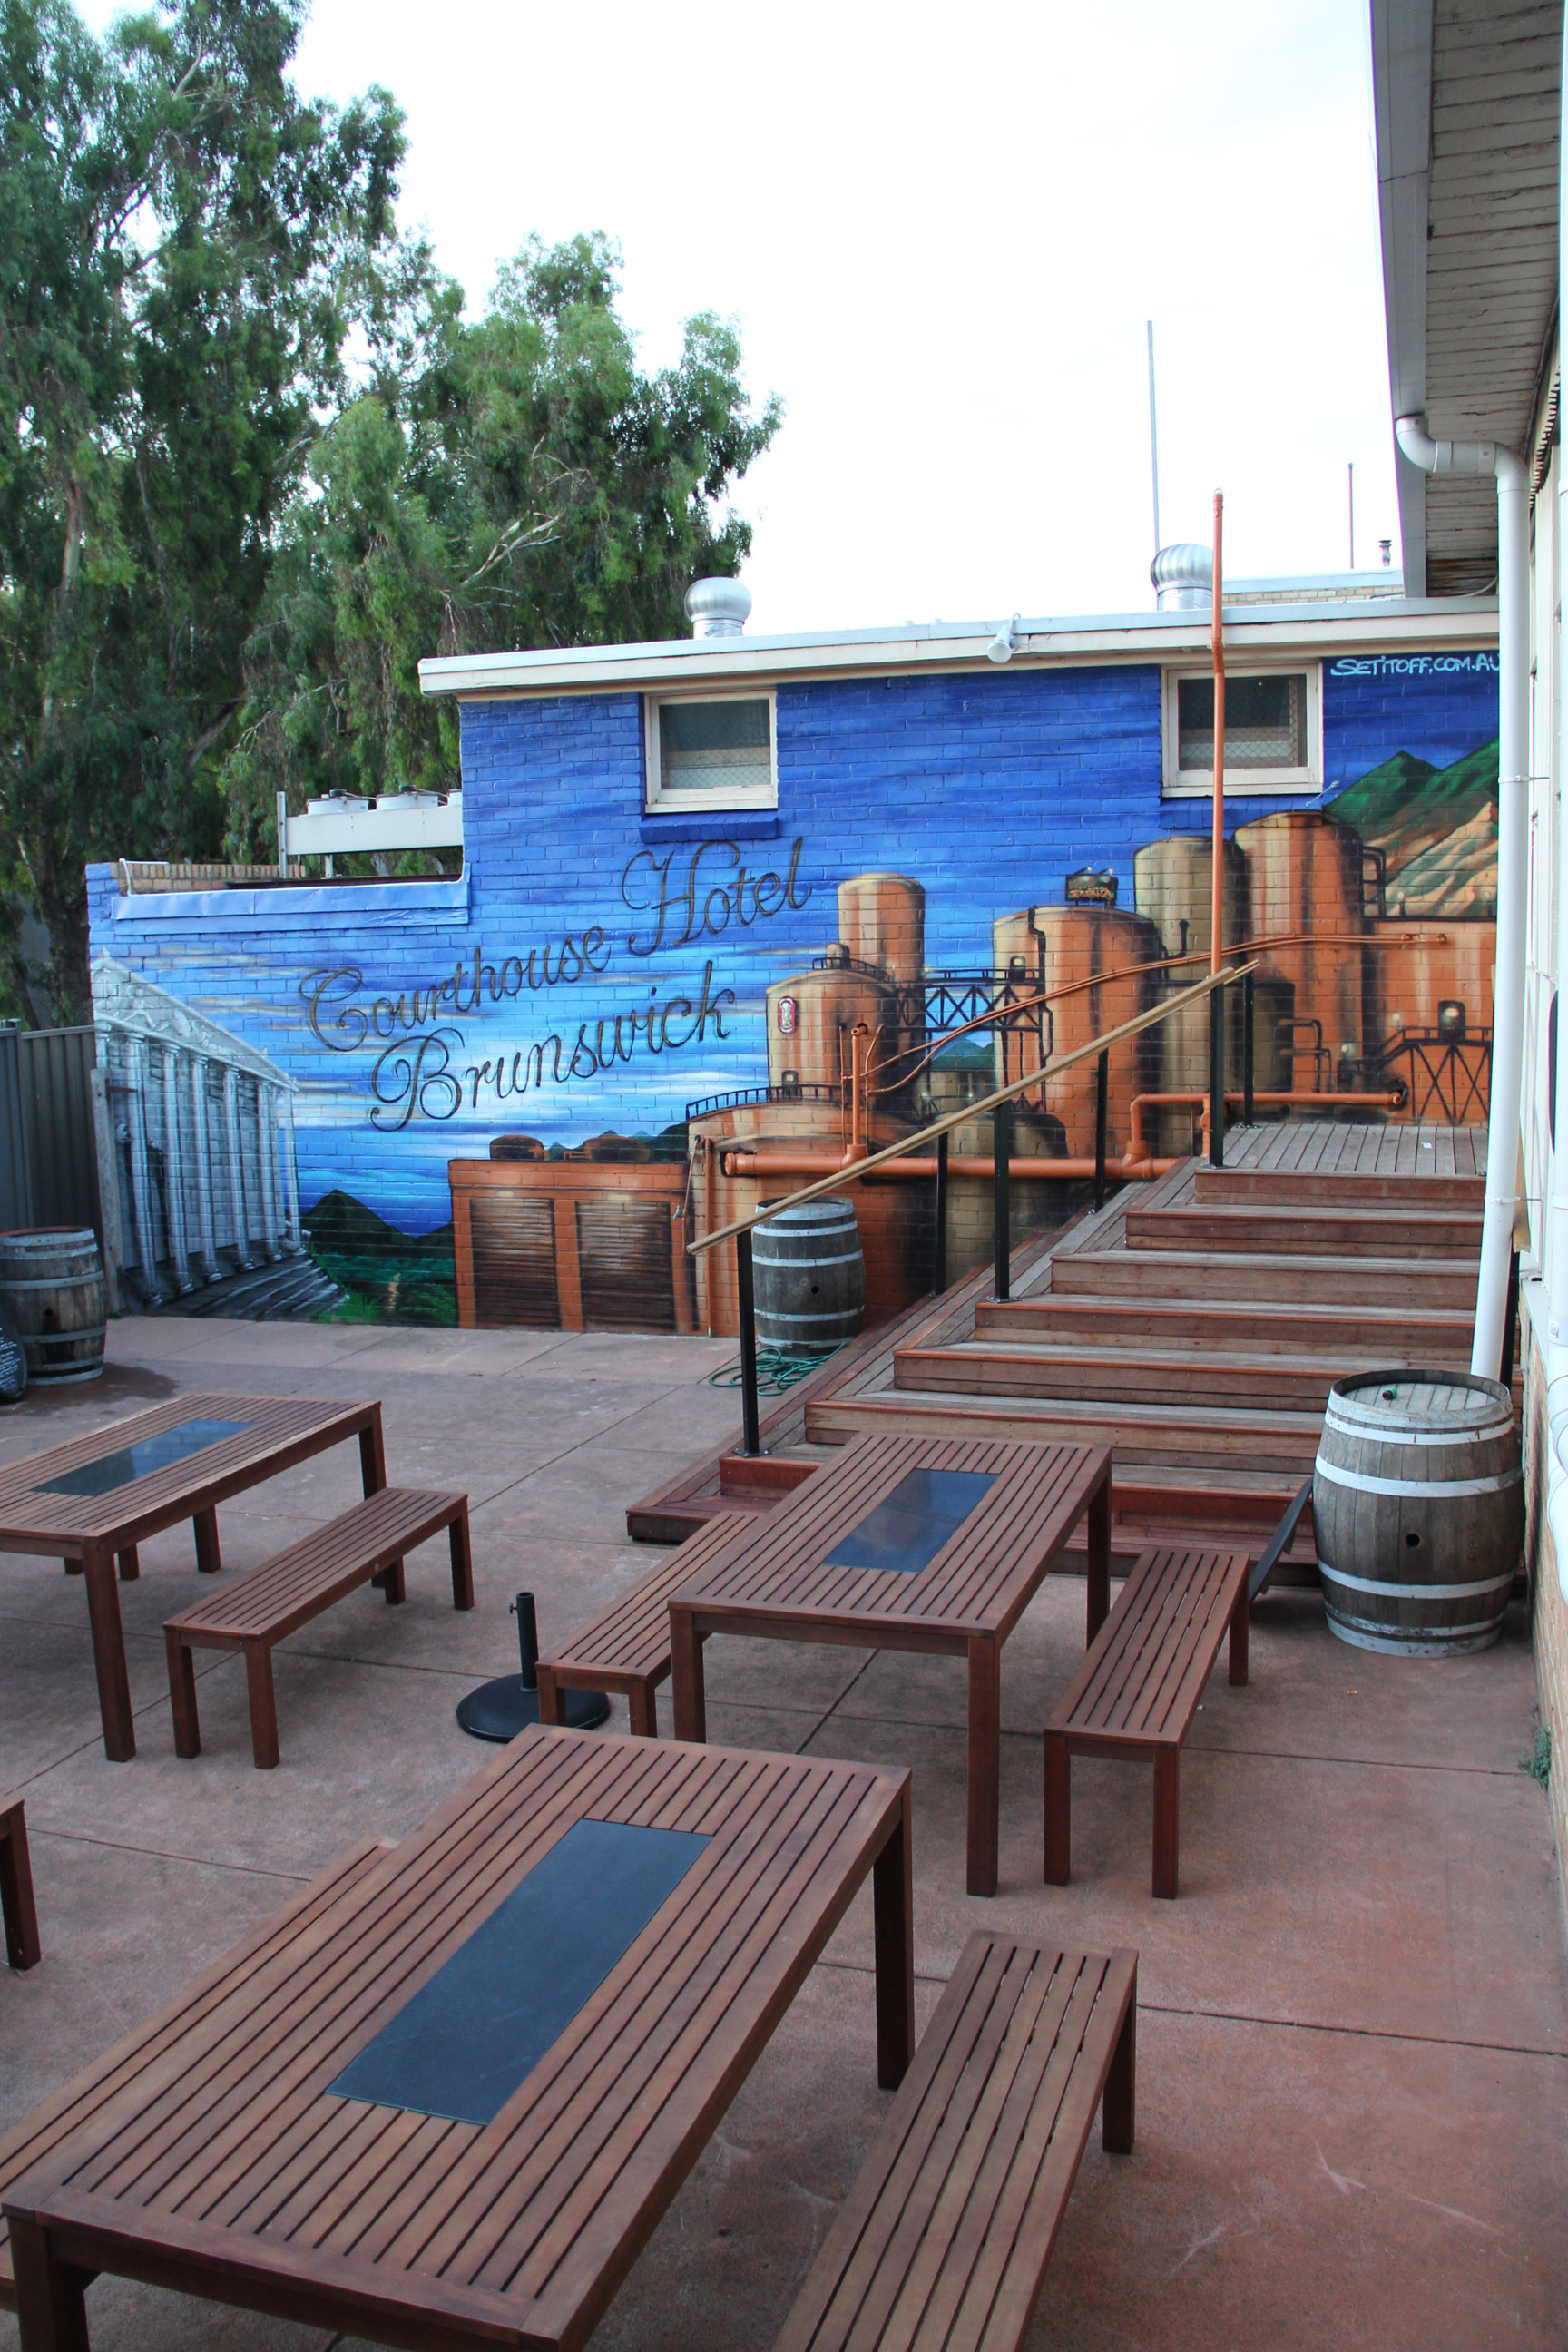 Courthouse hotel beer garden wall mural exterior